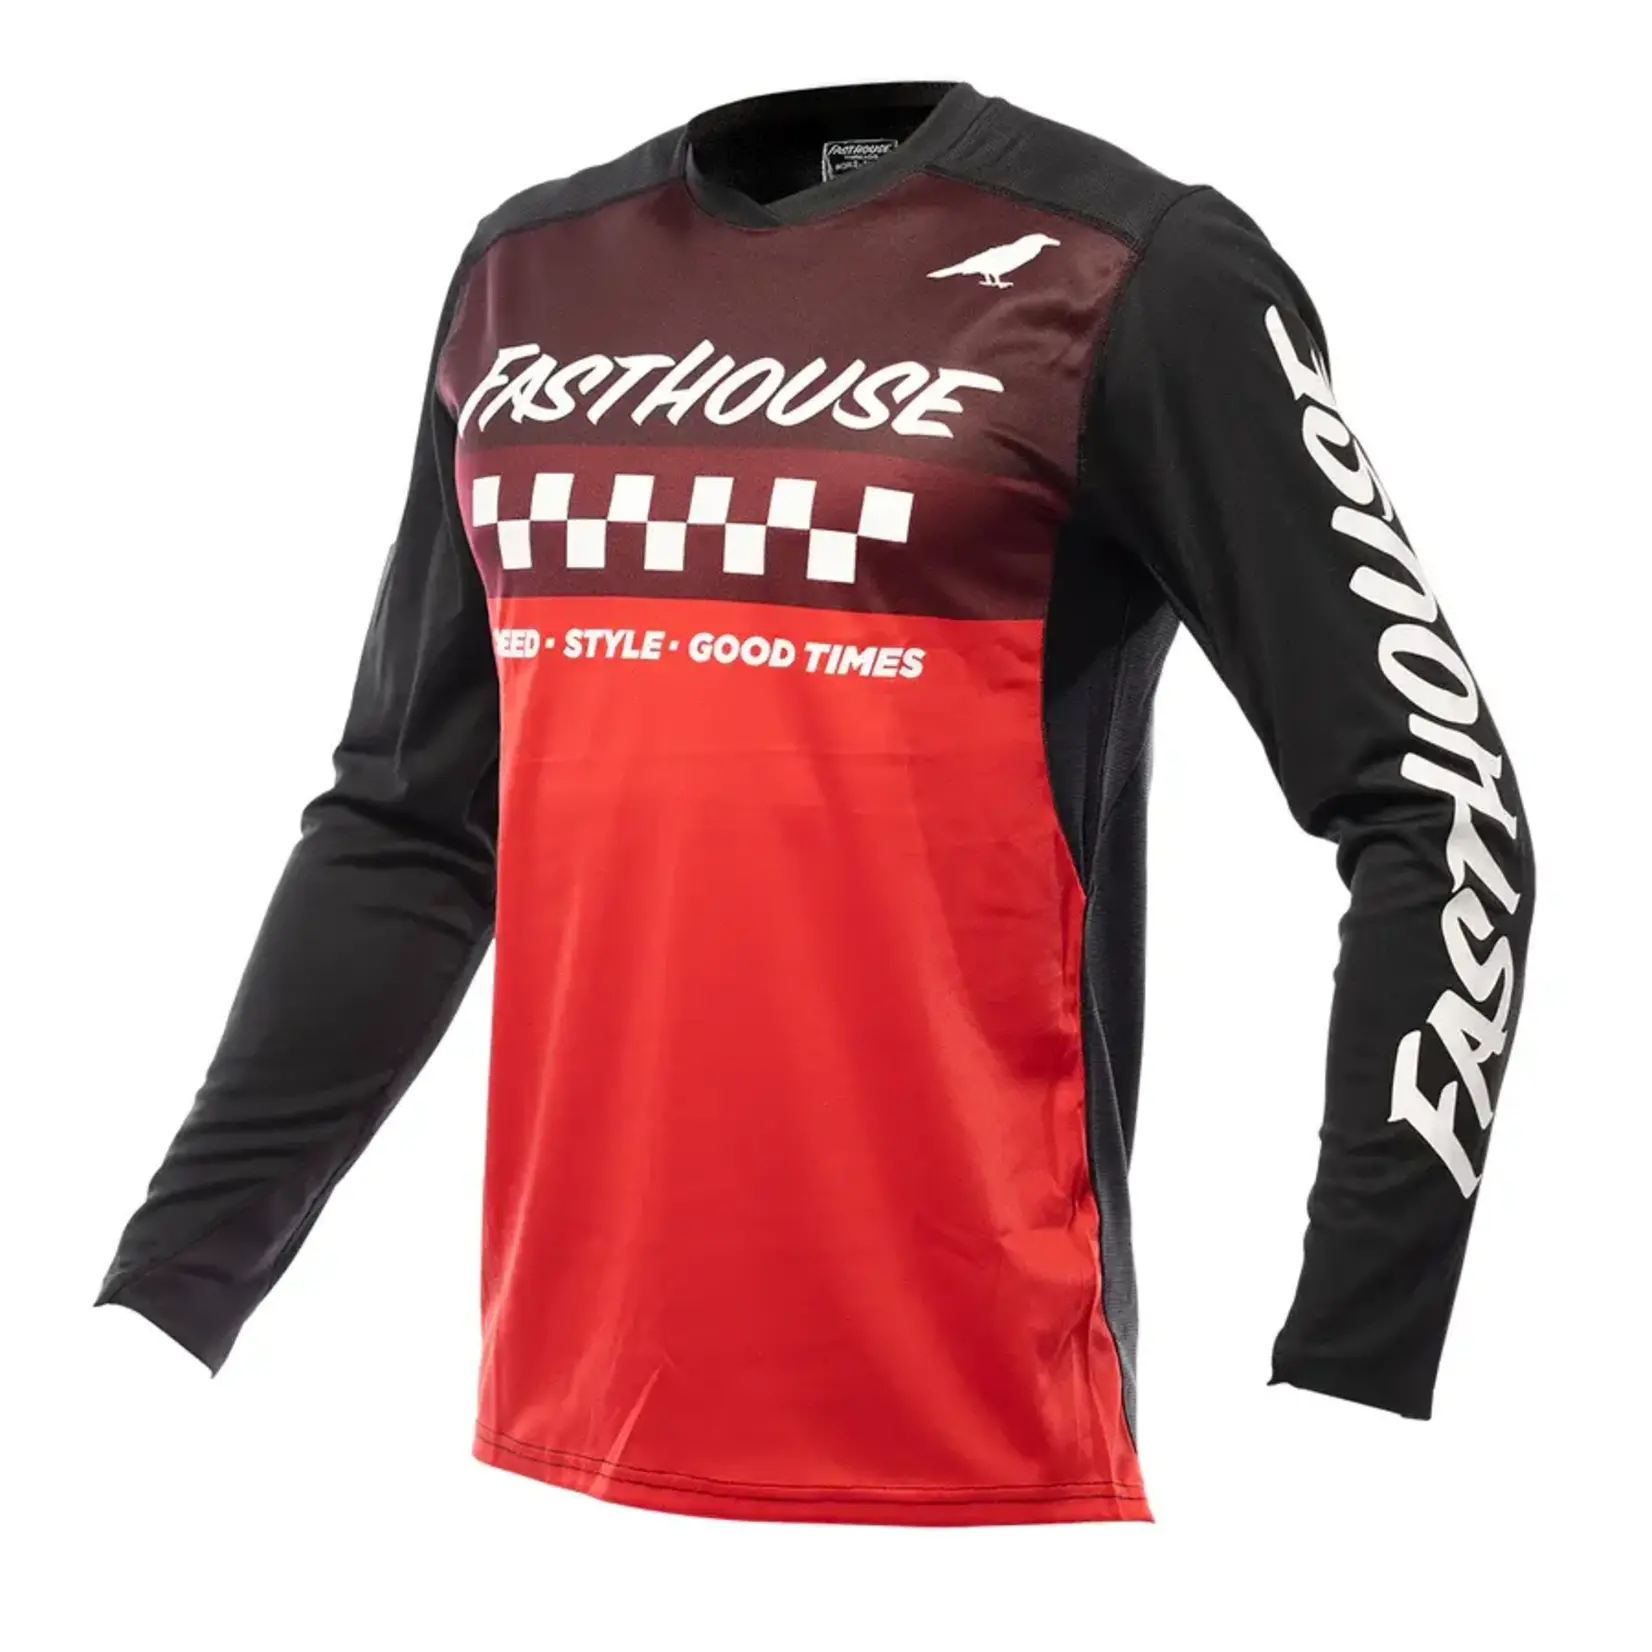 FASTHOUSE ELROD JERSEY